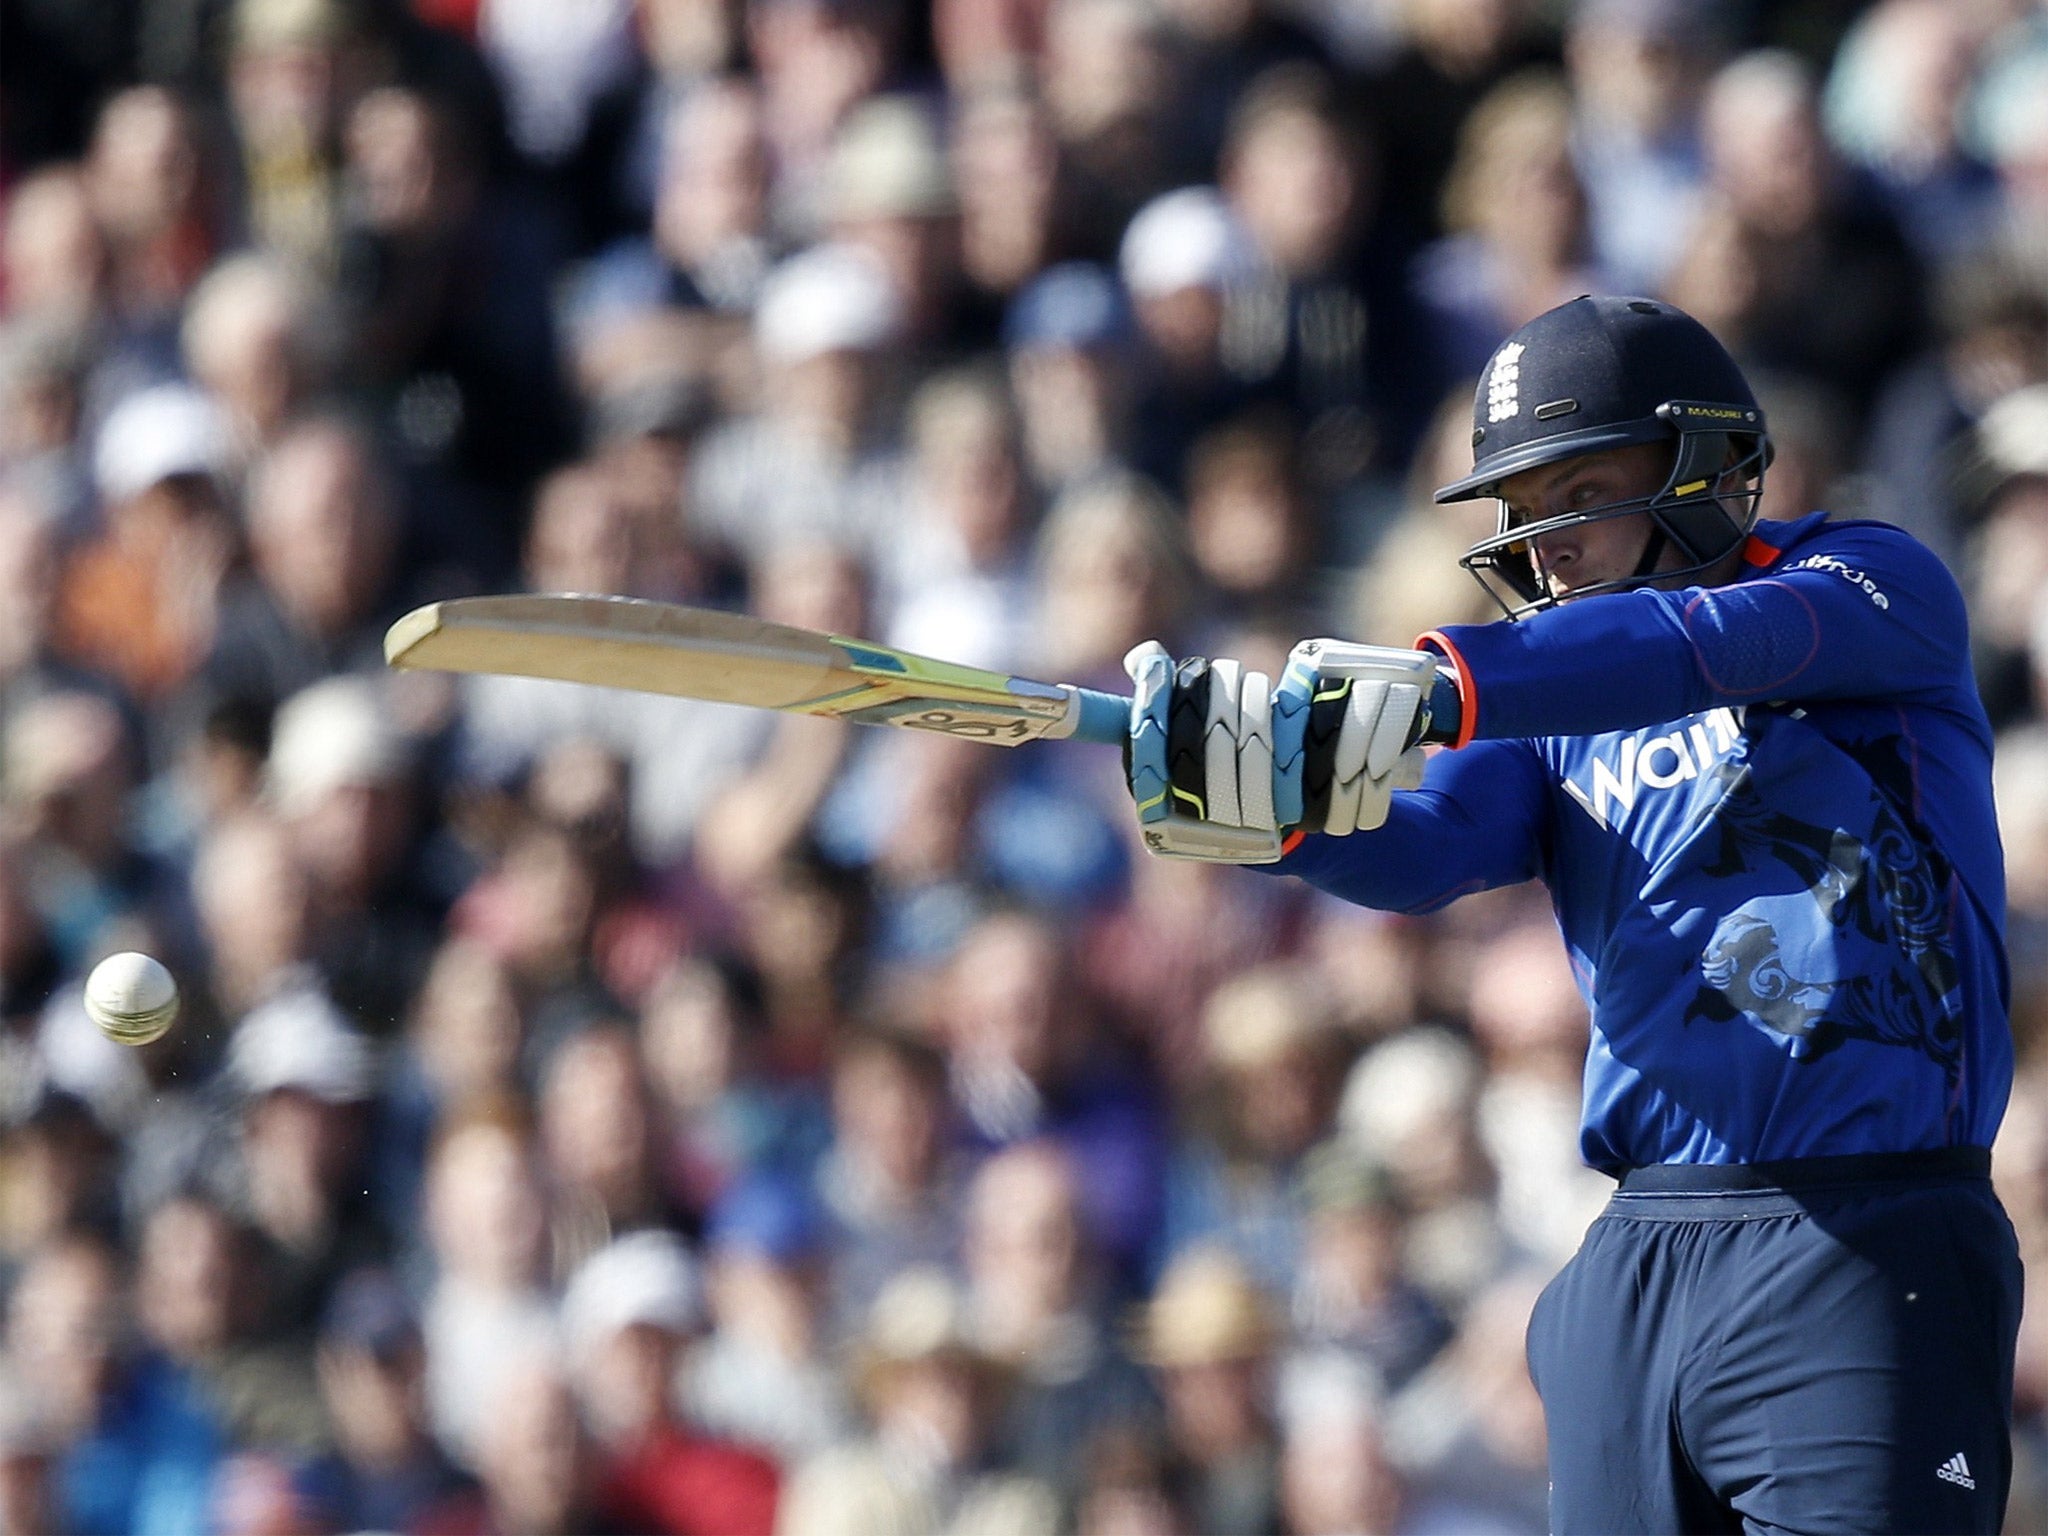 Jos Buttler was England's highest run-scorer with 129 in the win over New Zealand